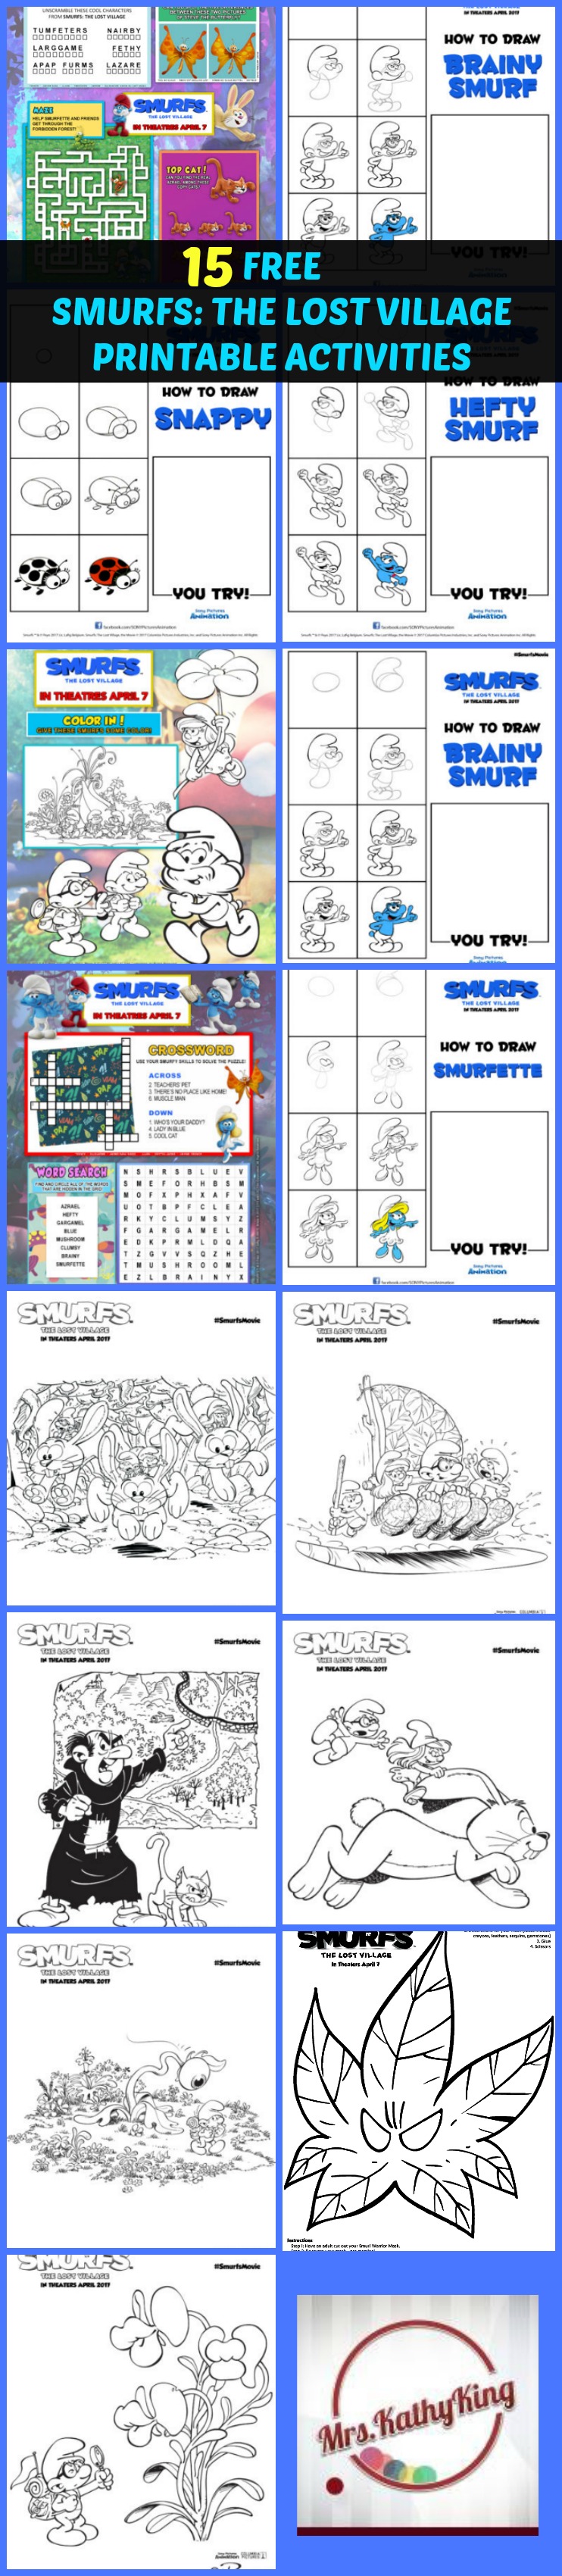 FREE SMURFS: THE LOST VILLAGE PRINTABLE ACTIVITIES